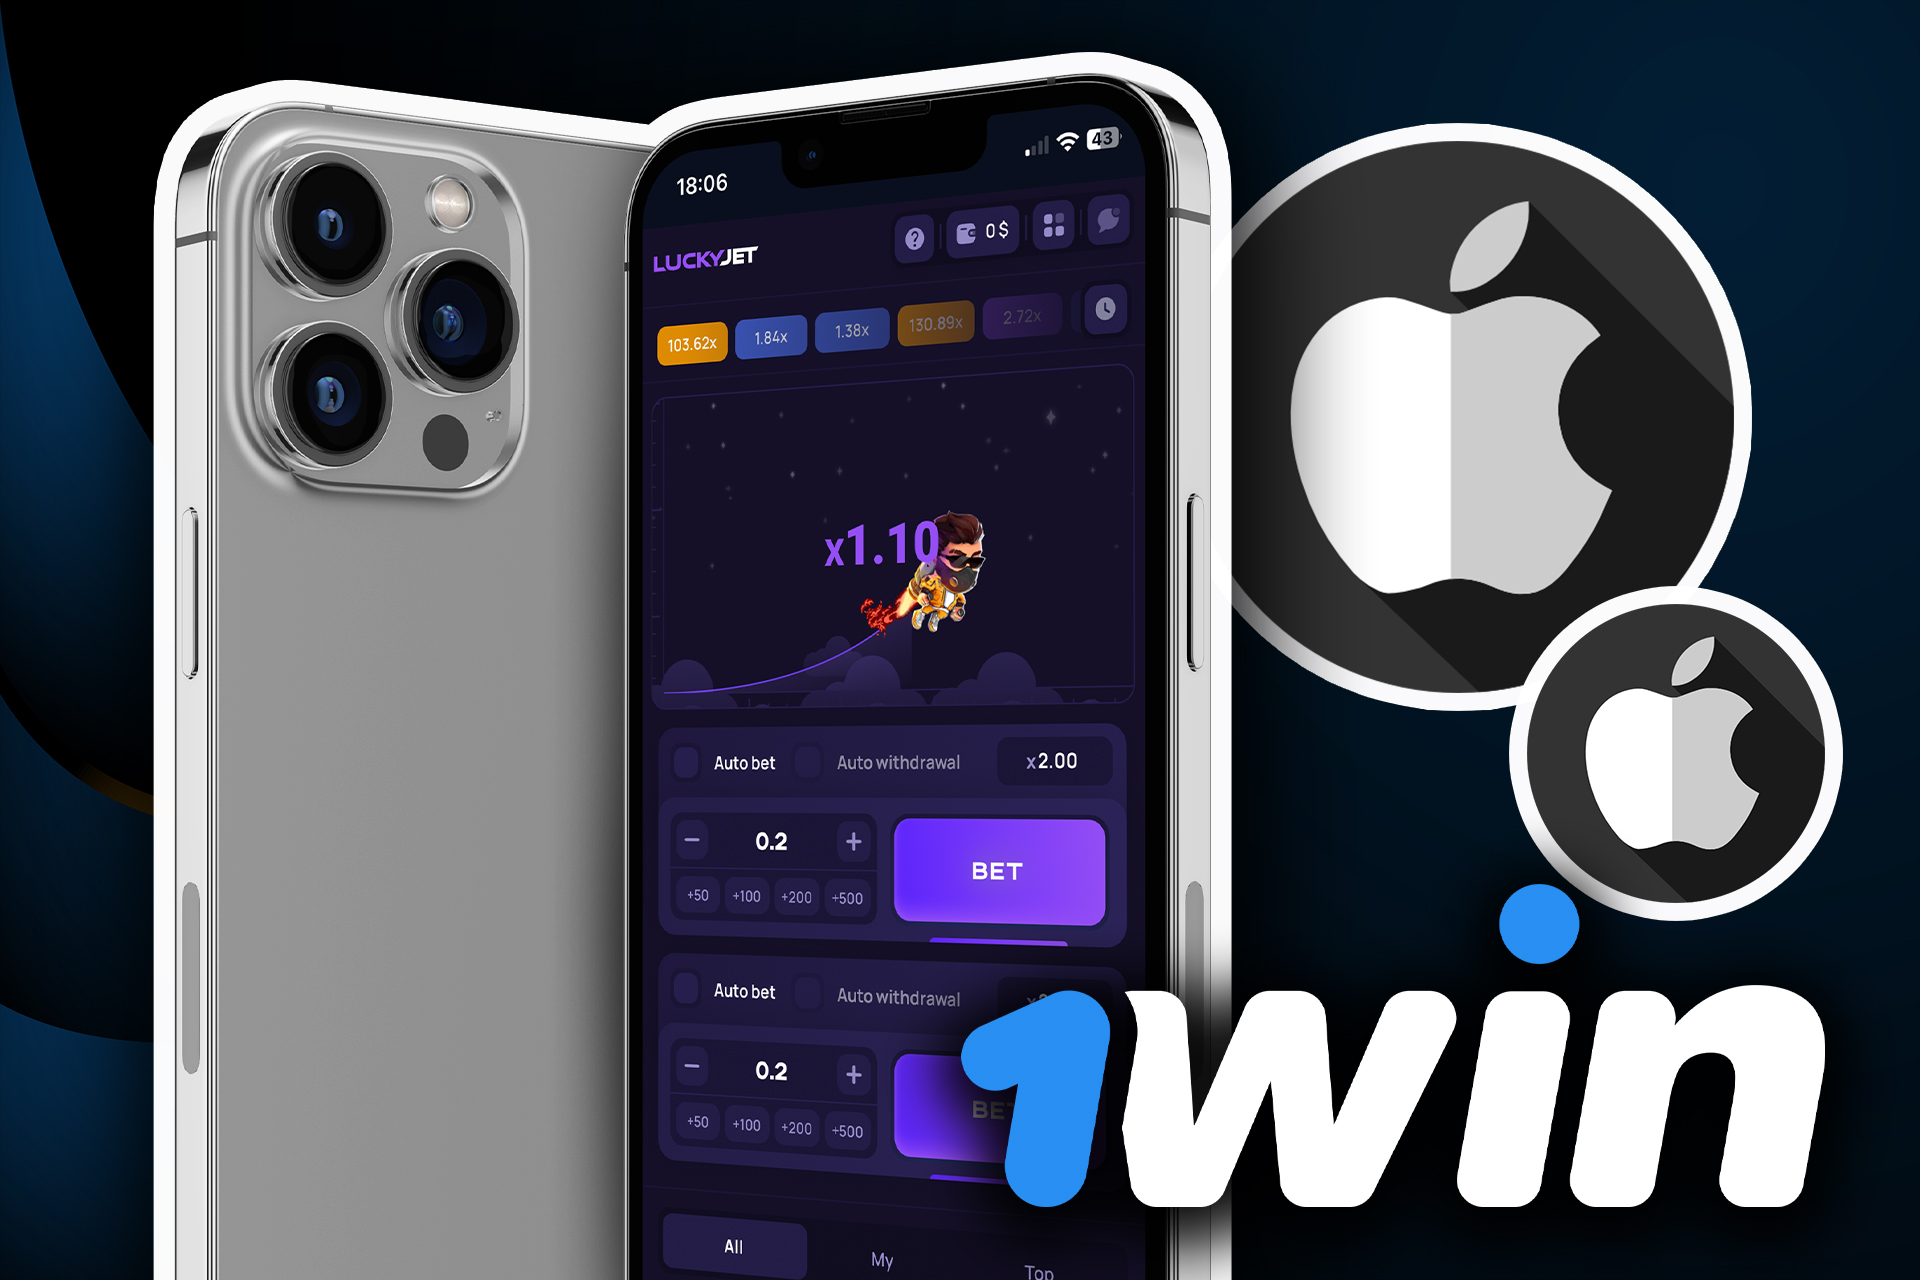 Download the 1win iOS app to play Lucky Jet from iPhone.